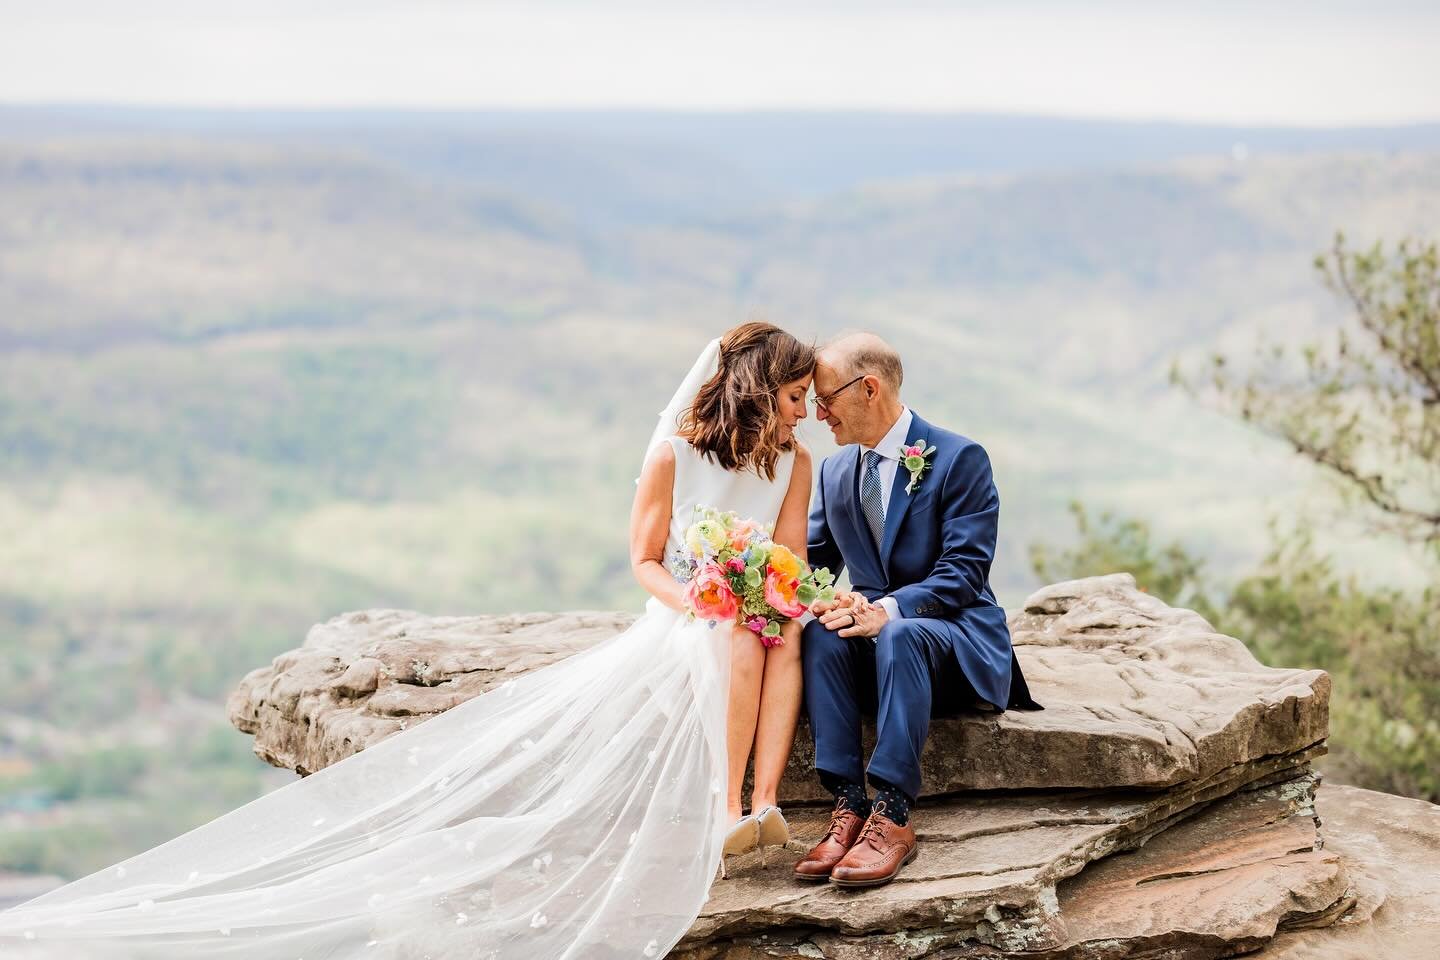 The sweetest elopement on Lookout Mountain earlier this month with Lauren, Ken, and their family. 😍🎉

Dress: @monicasbridal 
Flowers: @summerfieldstudiofloral